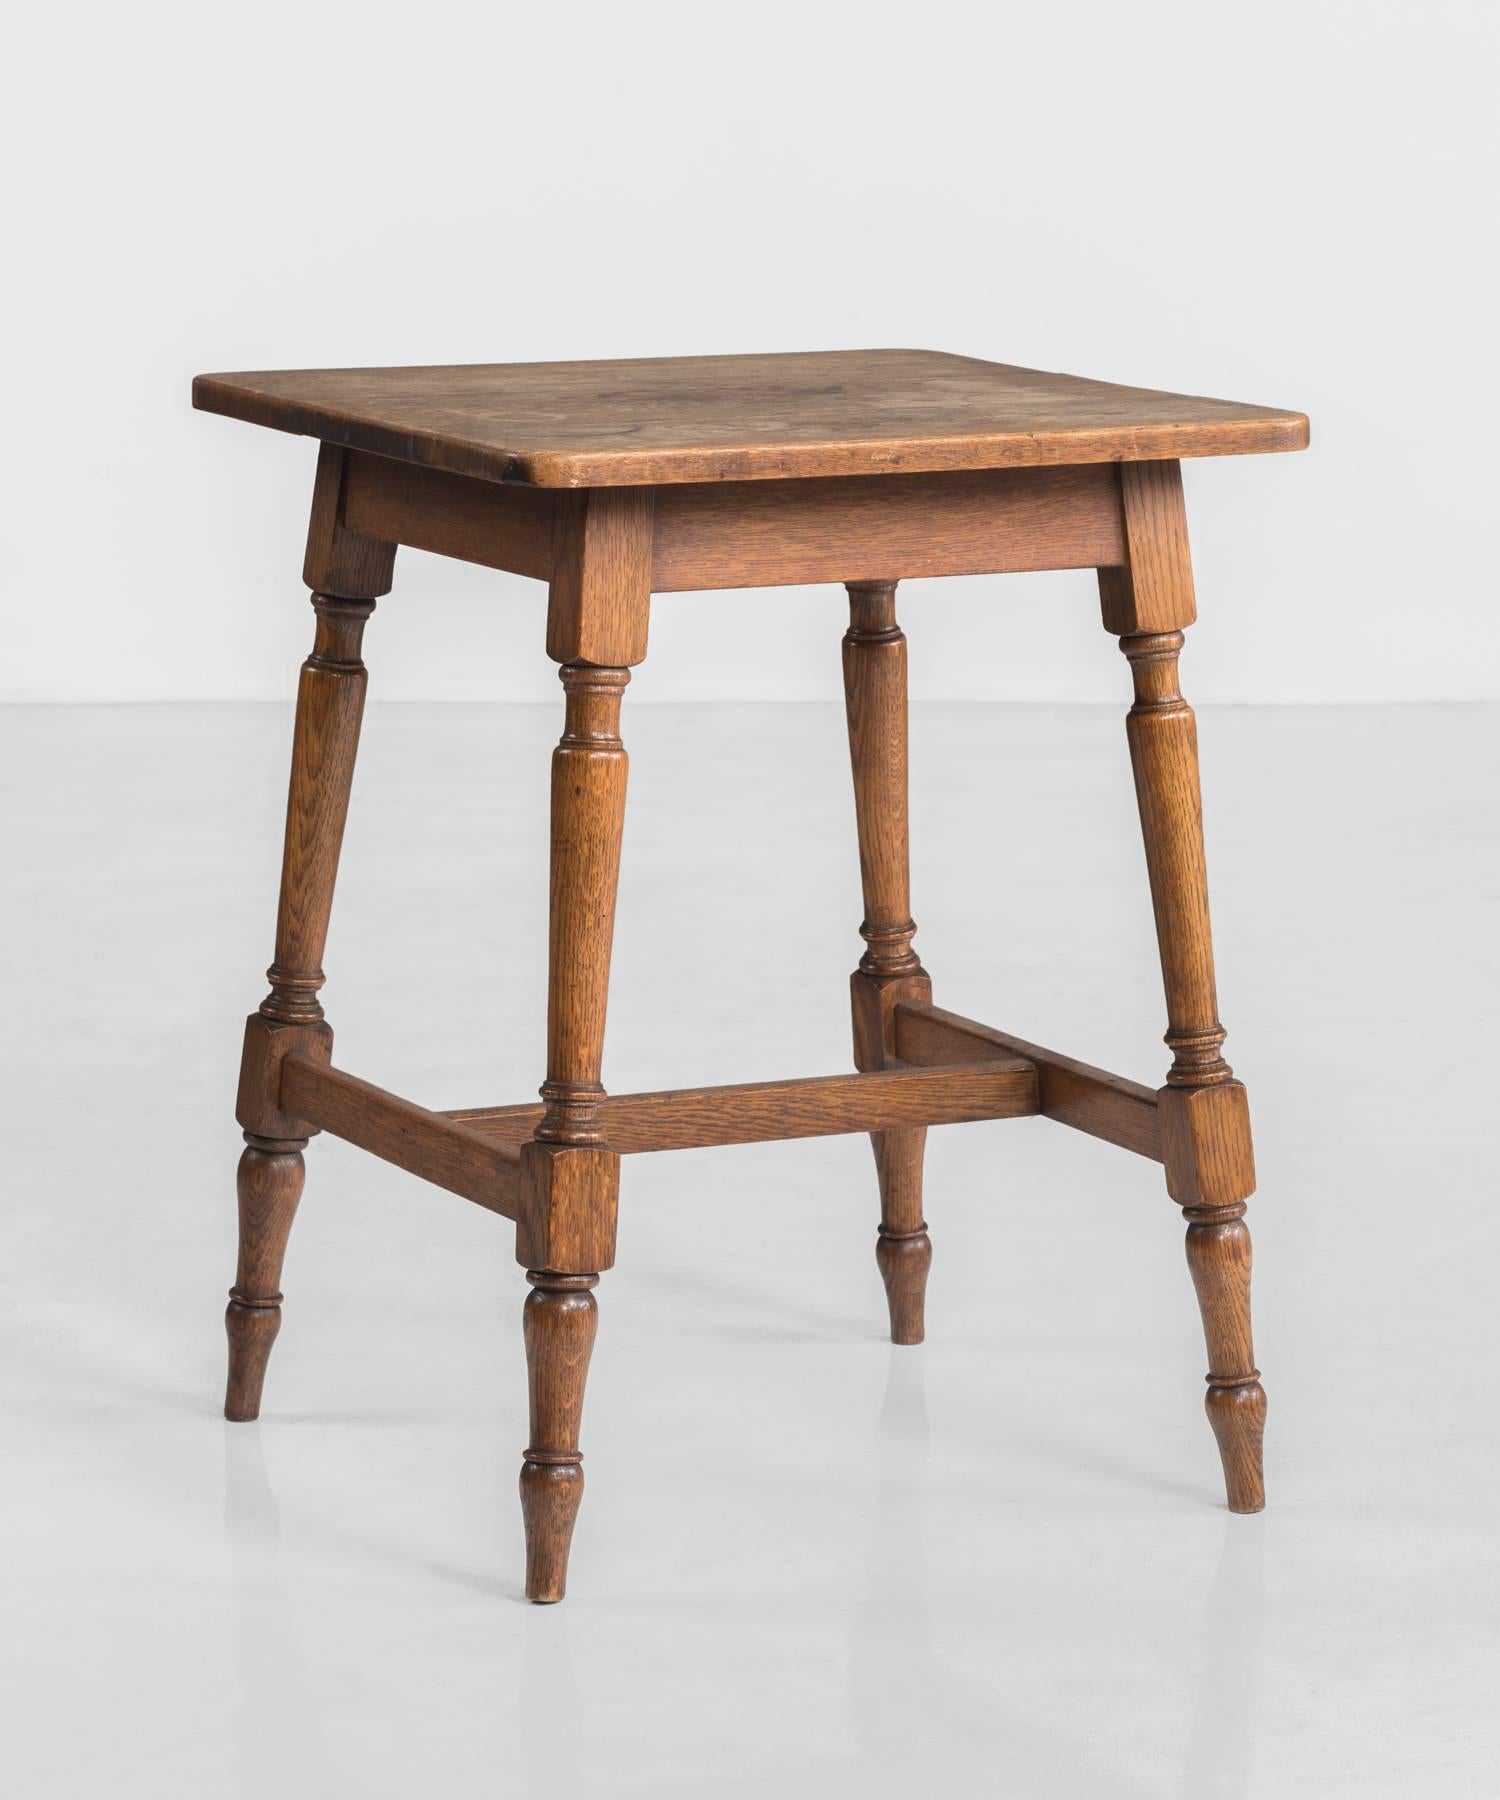 Oak Side Table, circa 1890

Beautifully patinated top with handsome turned legs.